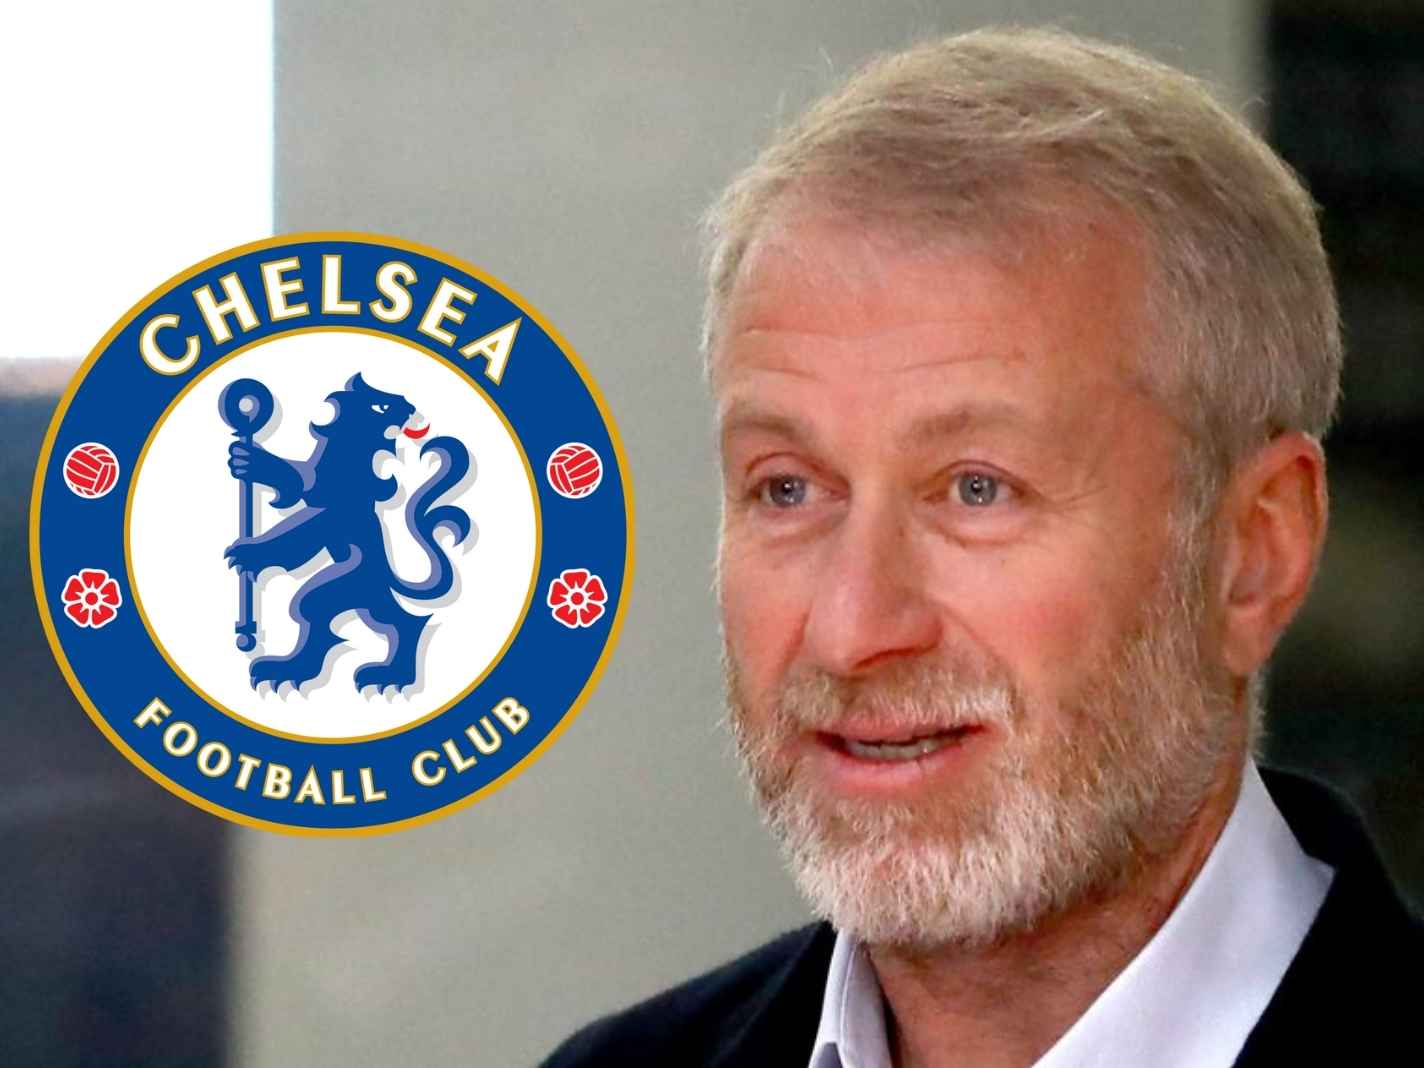 UK have put sanctions on Roman Abramovich due to his connections to Putin